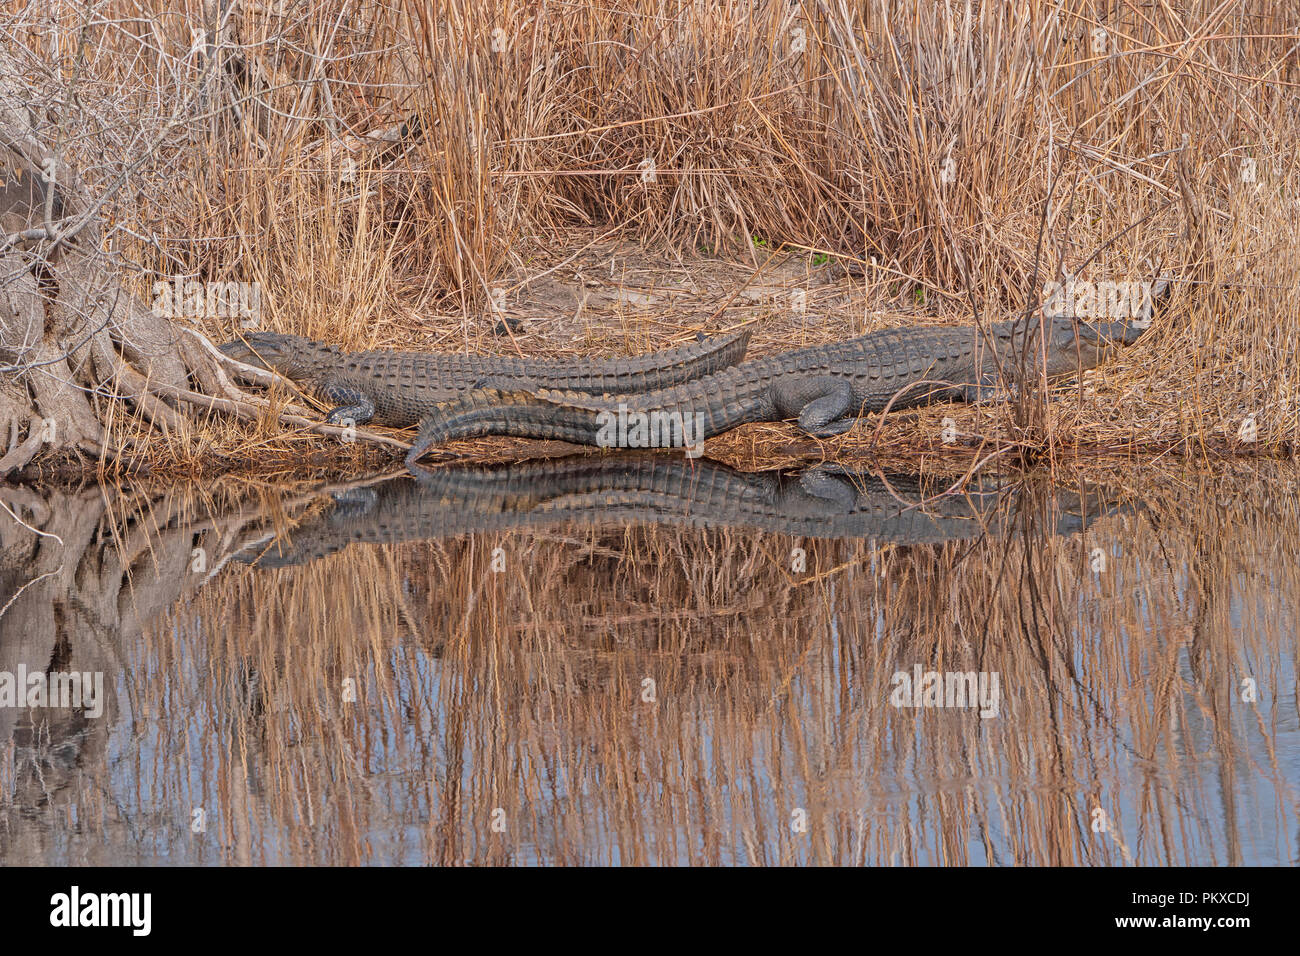 Alligators Basking along a Slow Moving Suwannee River in Stephen C. Foster State Park in the Okefenokee Swamp in Georgia Stock Photo